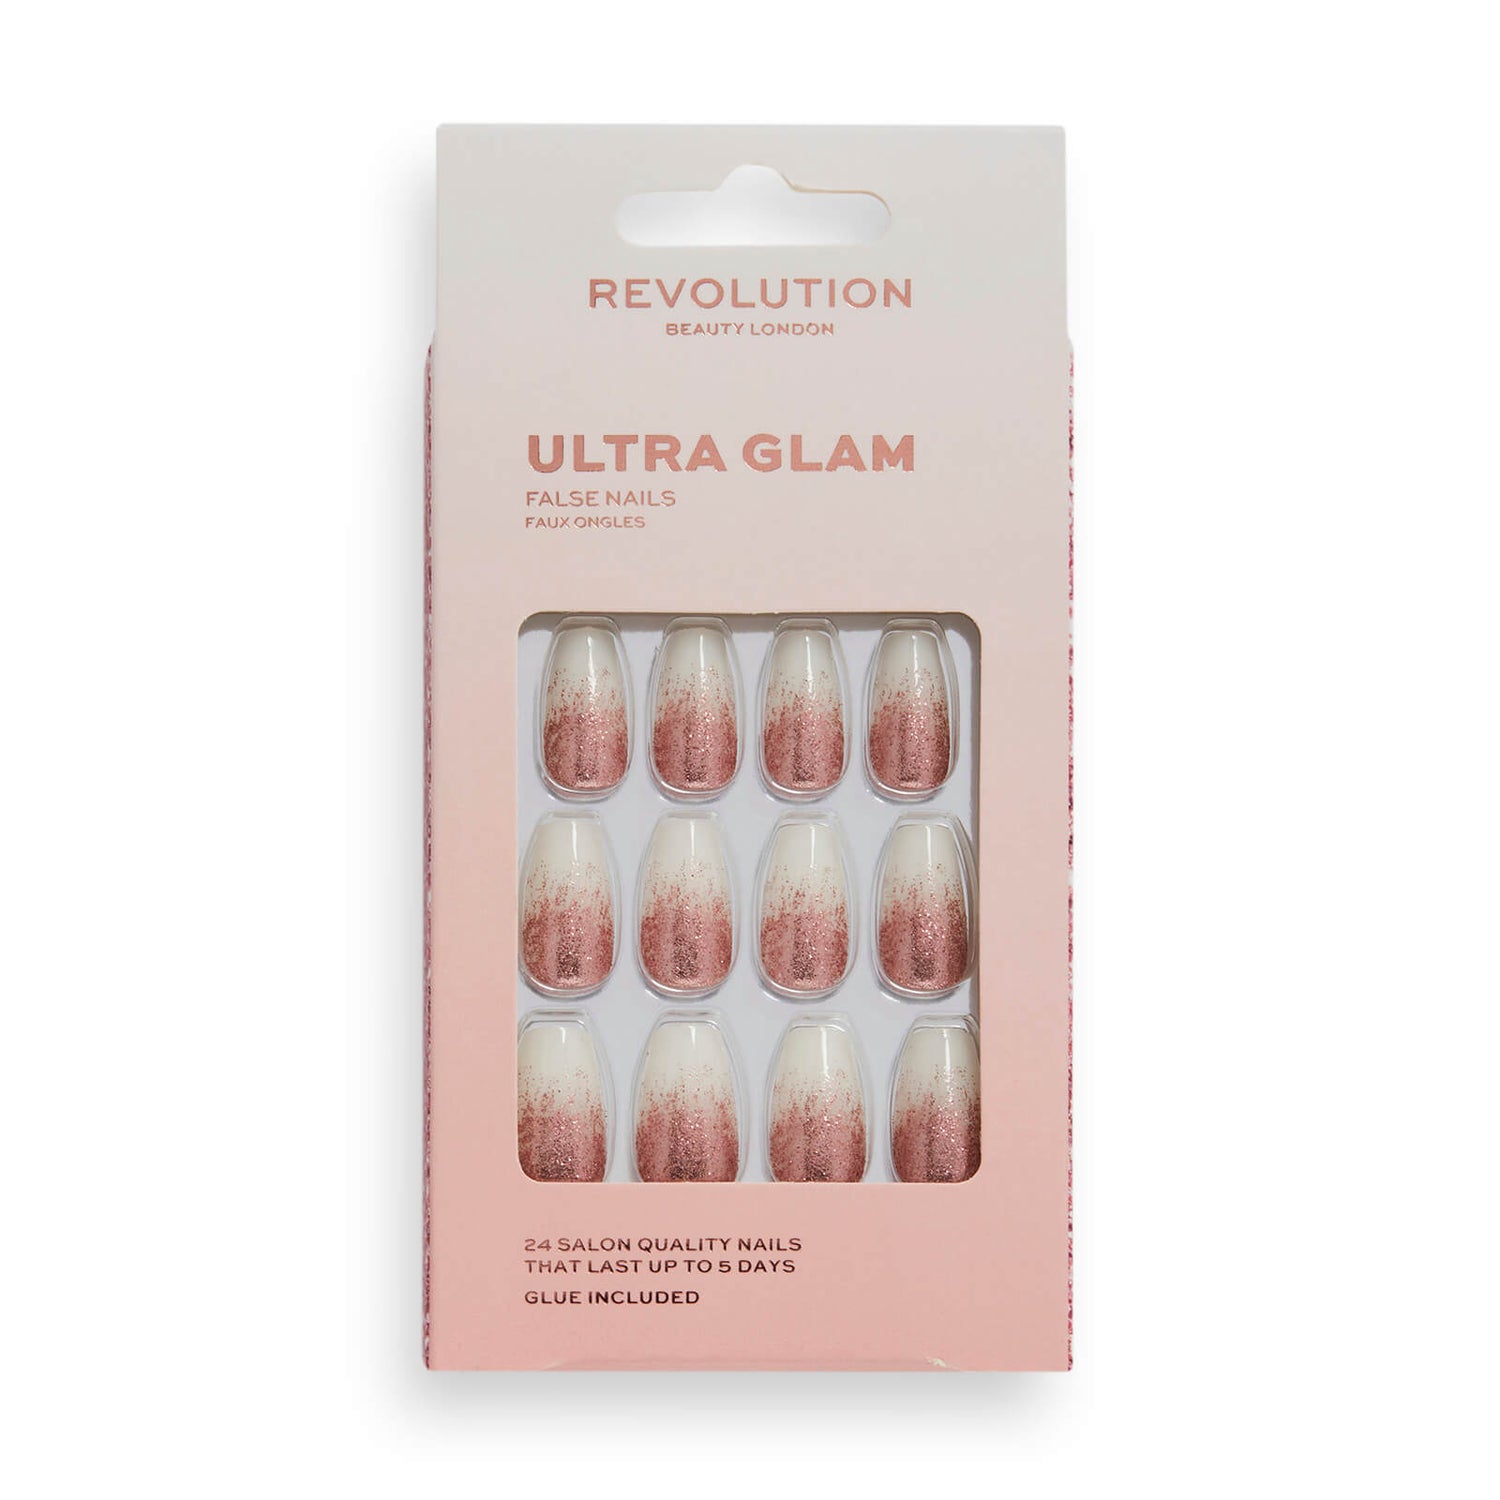 Makeup Revolution Flawless Press-On Nails Ultra Glam